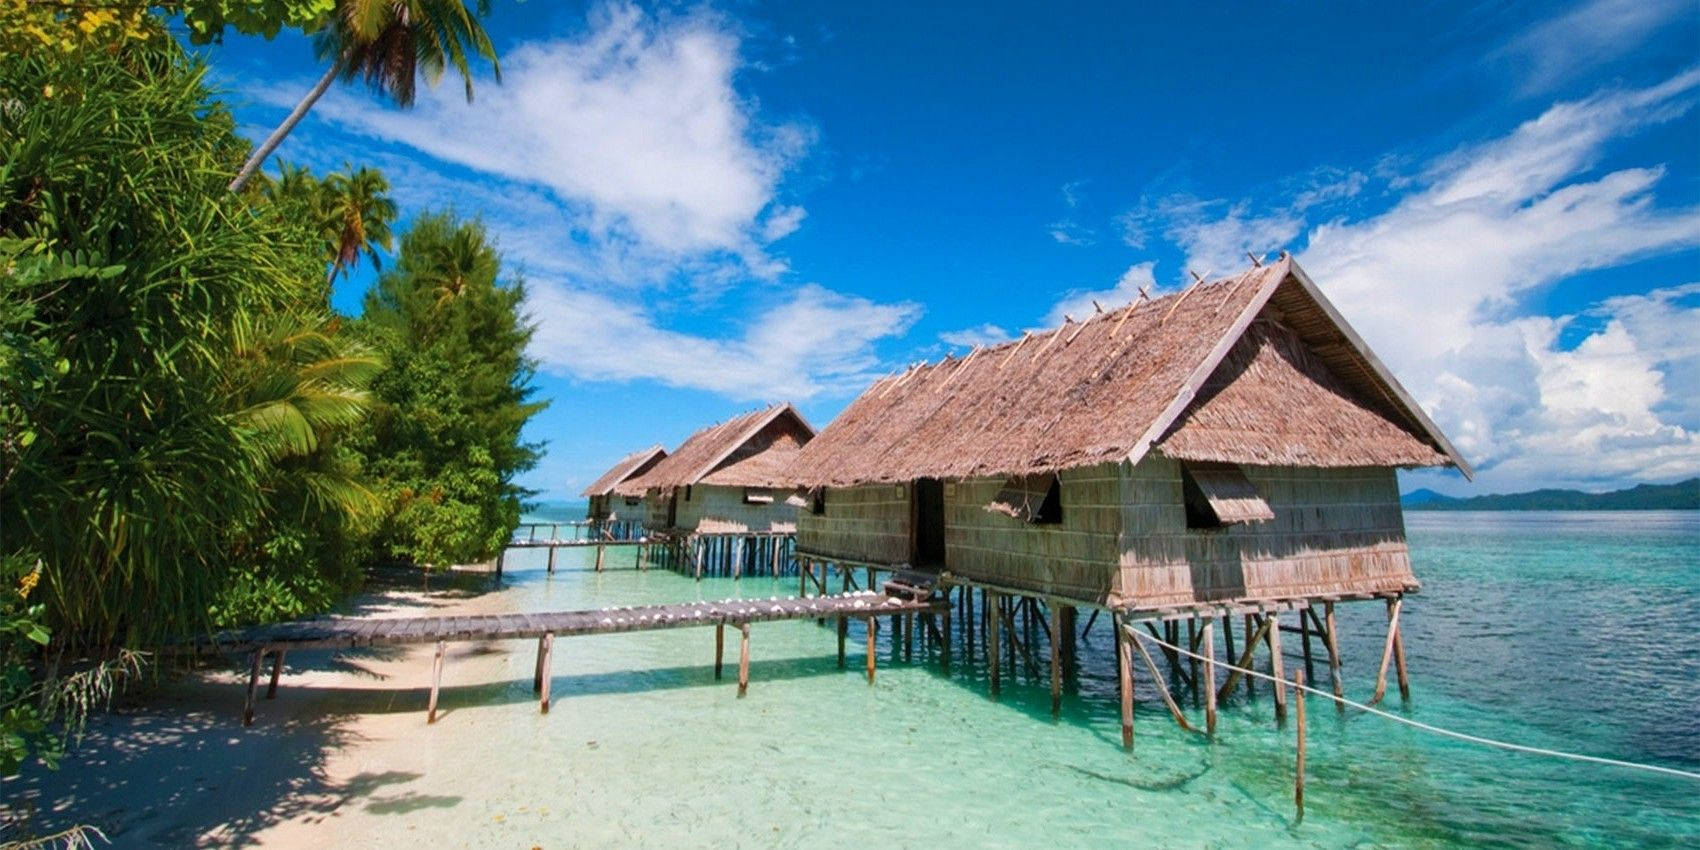 Papua New Guinea Huts By The Beach Wallpaper